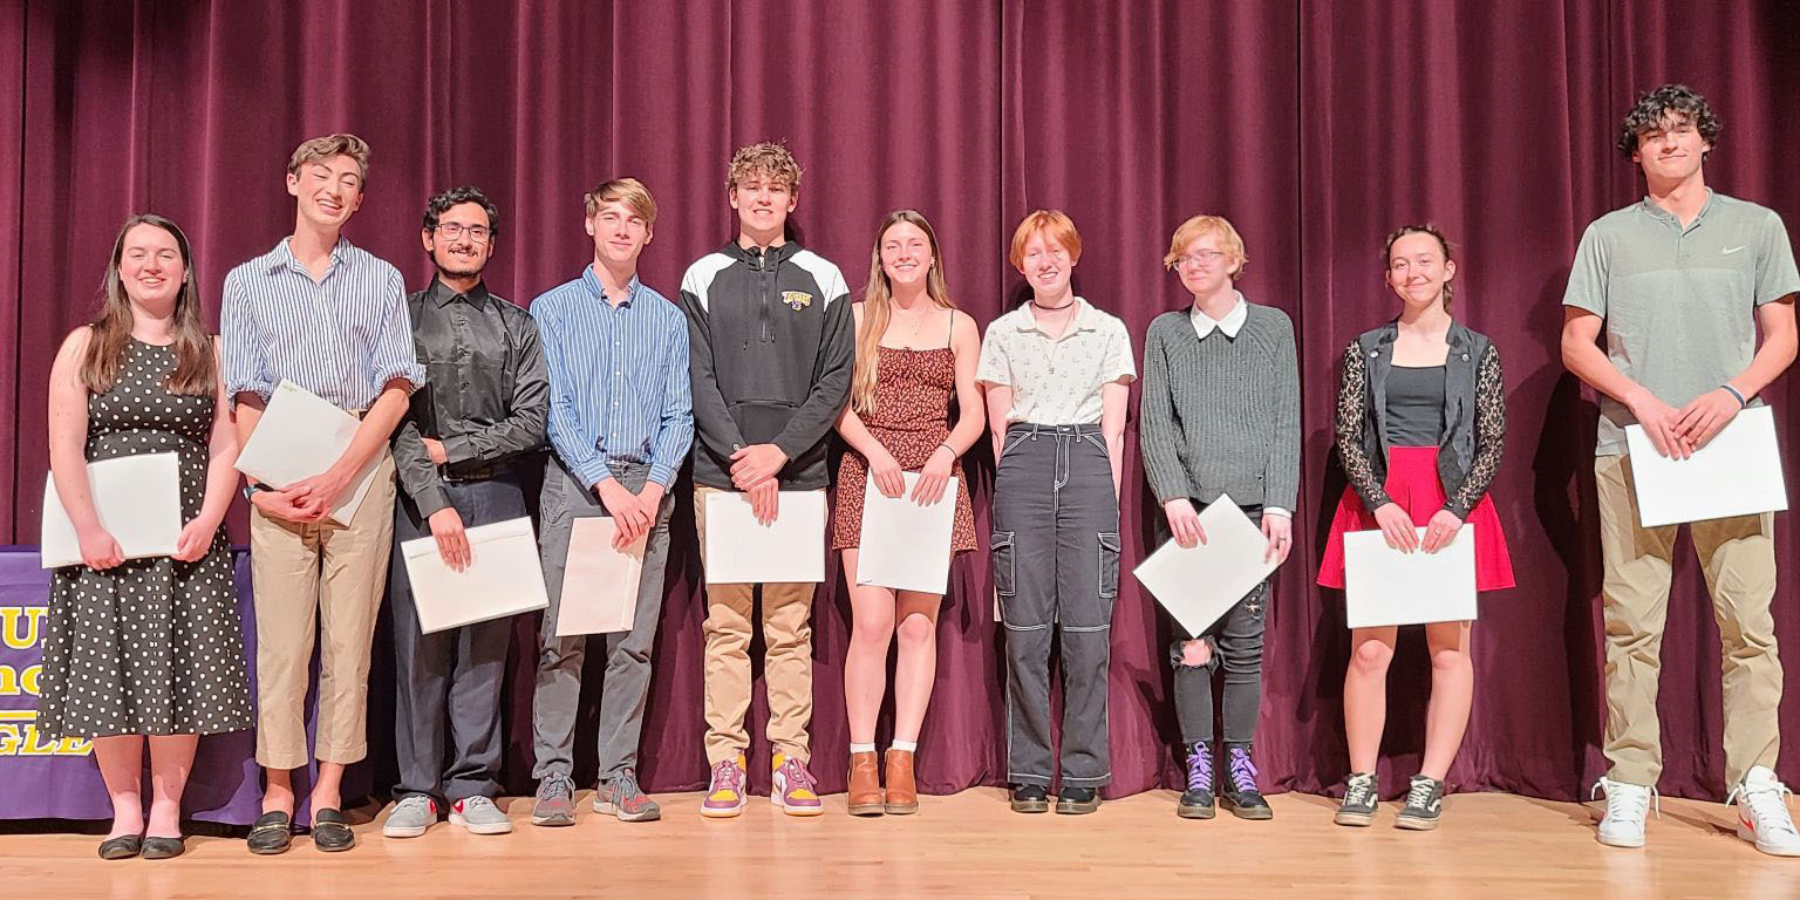 ten high school students stand on a stage holding certificates